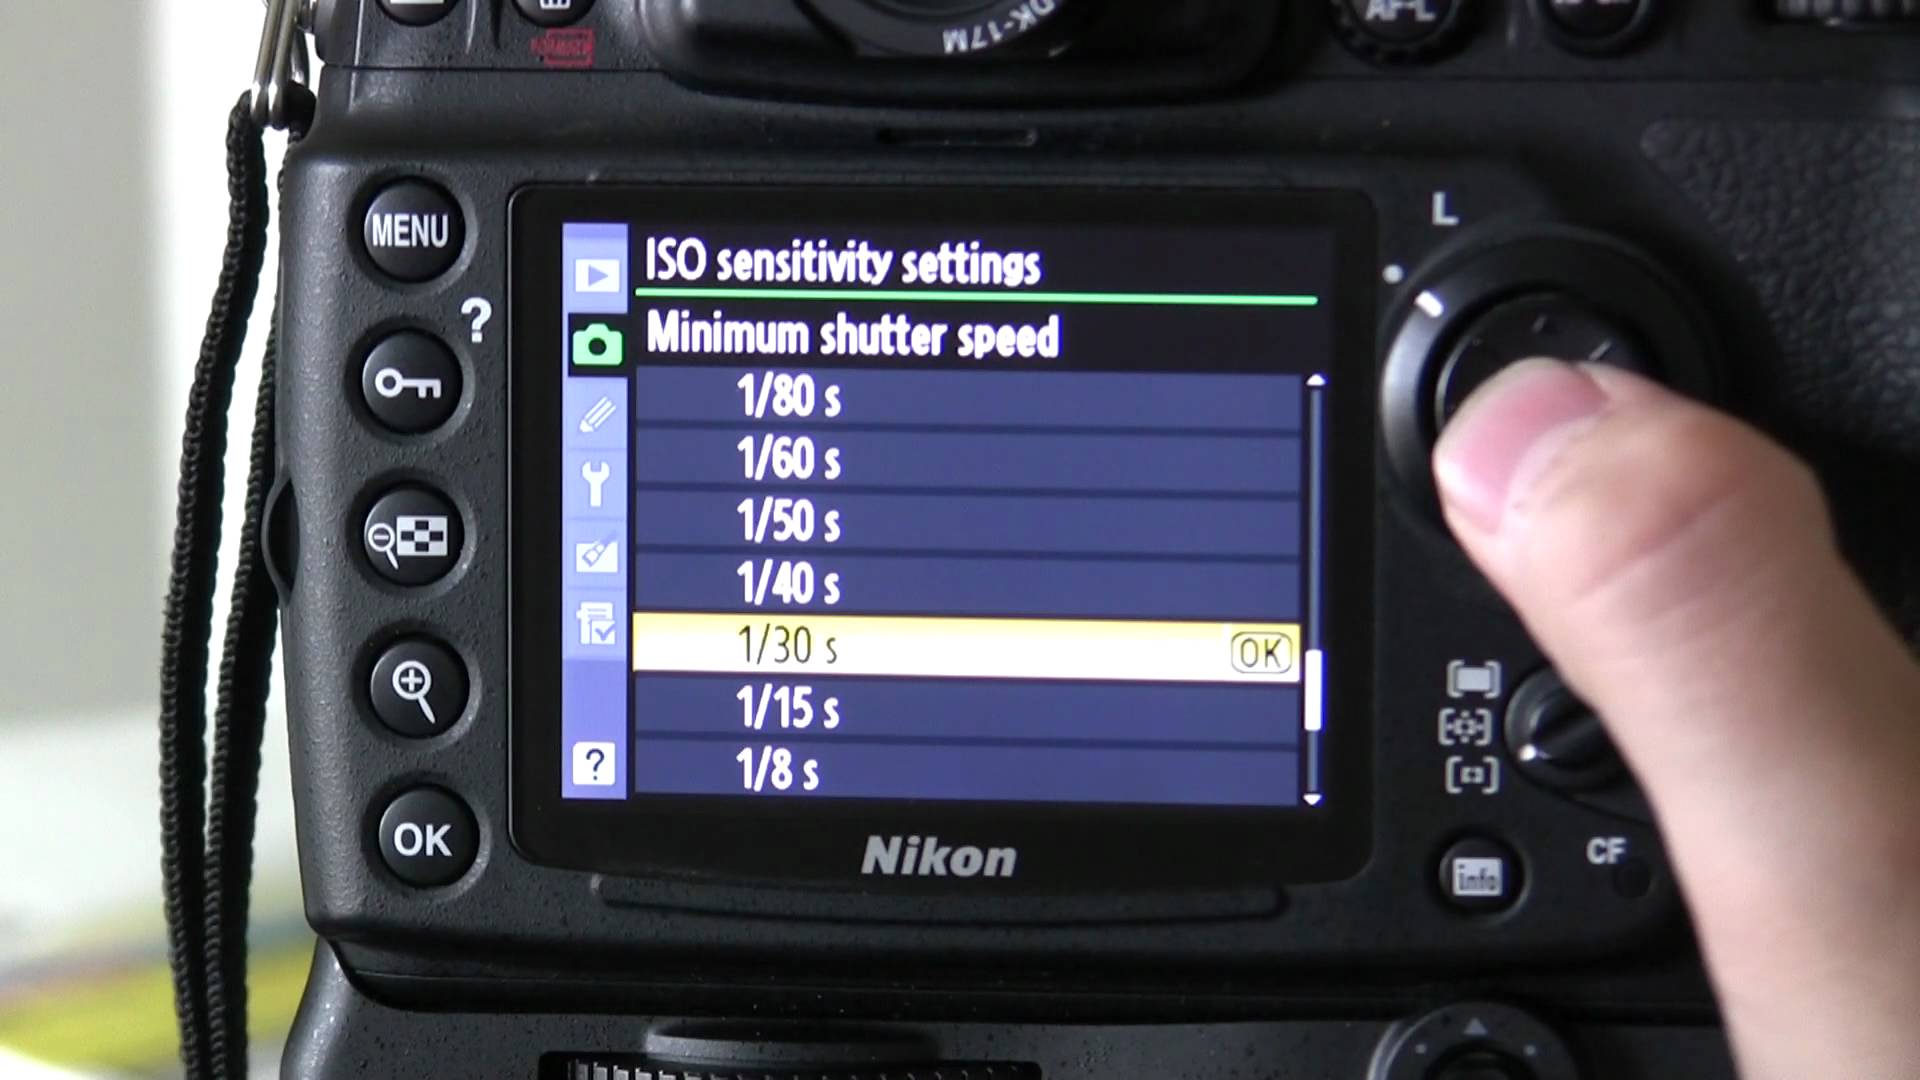 How to change shutter speed, aperture on Nikon D3100